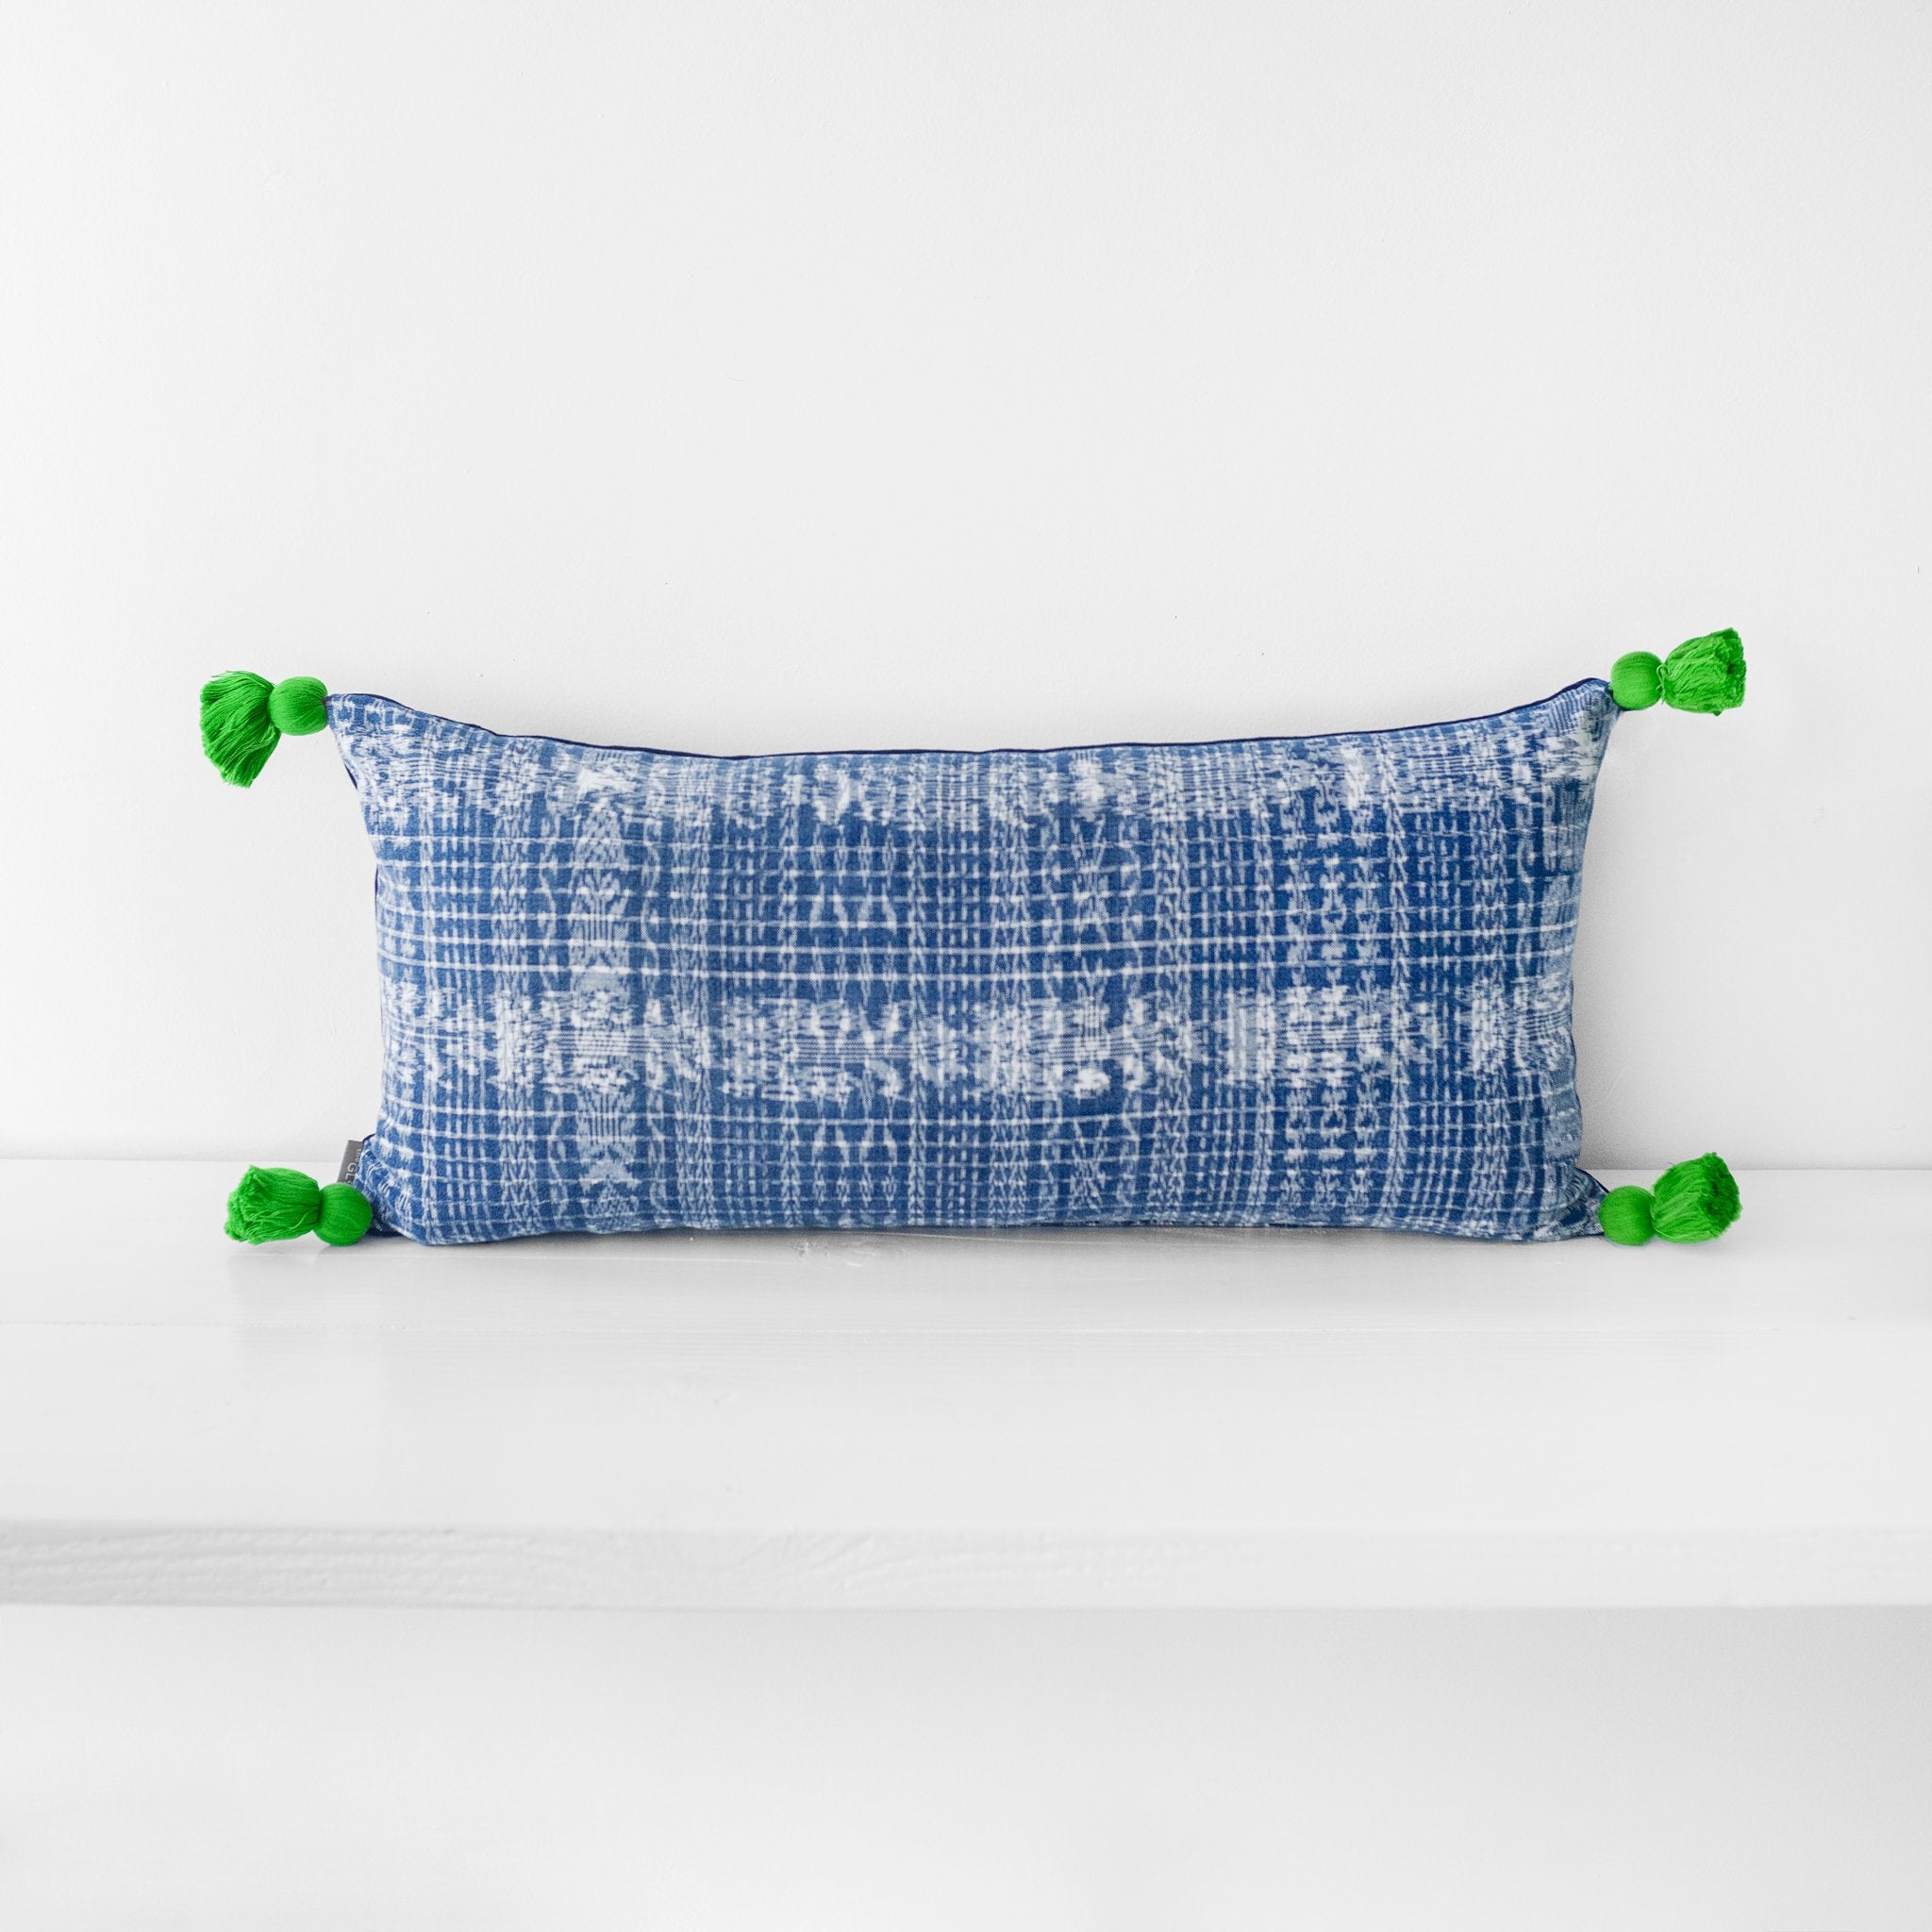 Large lumbar blue and white textile pillow with green tassels at each corner